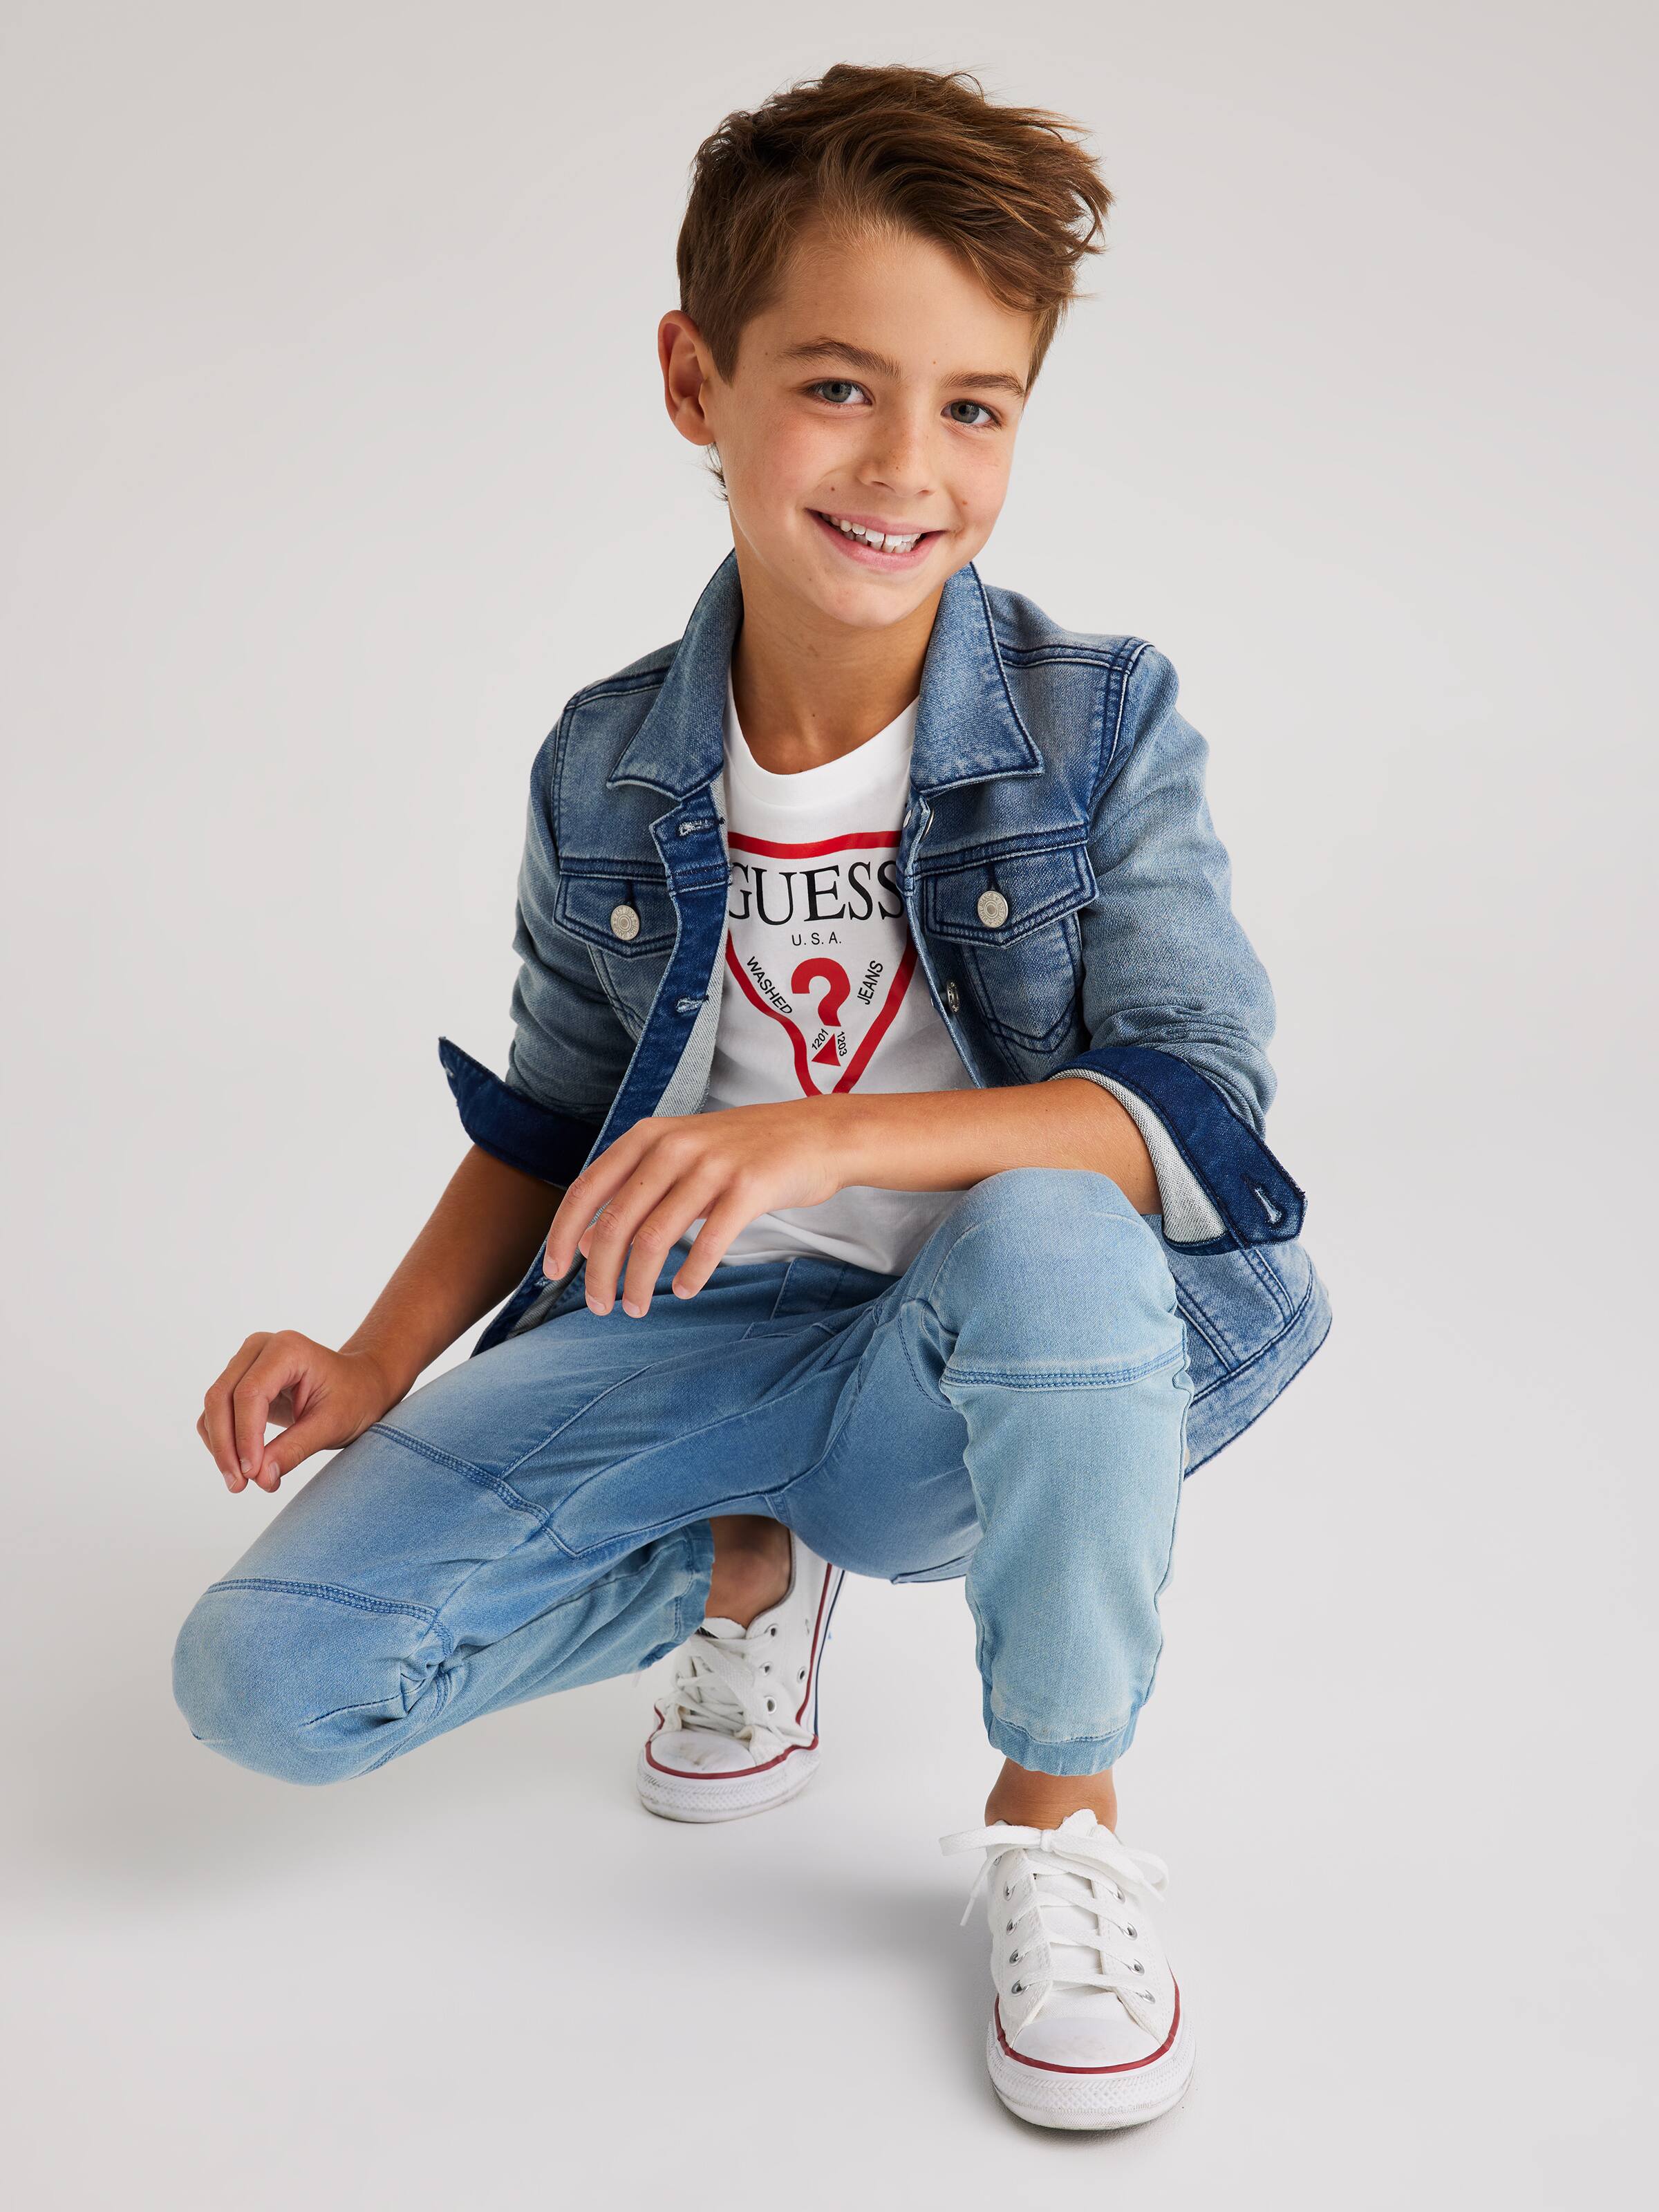 Kids Guess Clothing Just